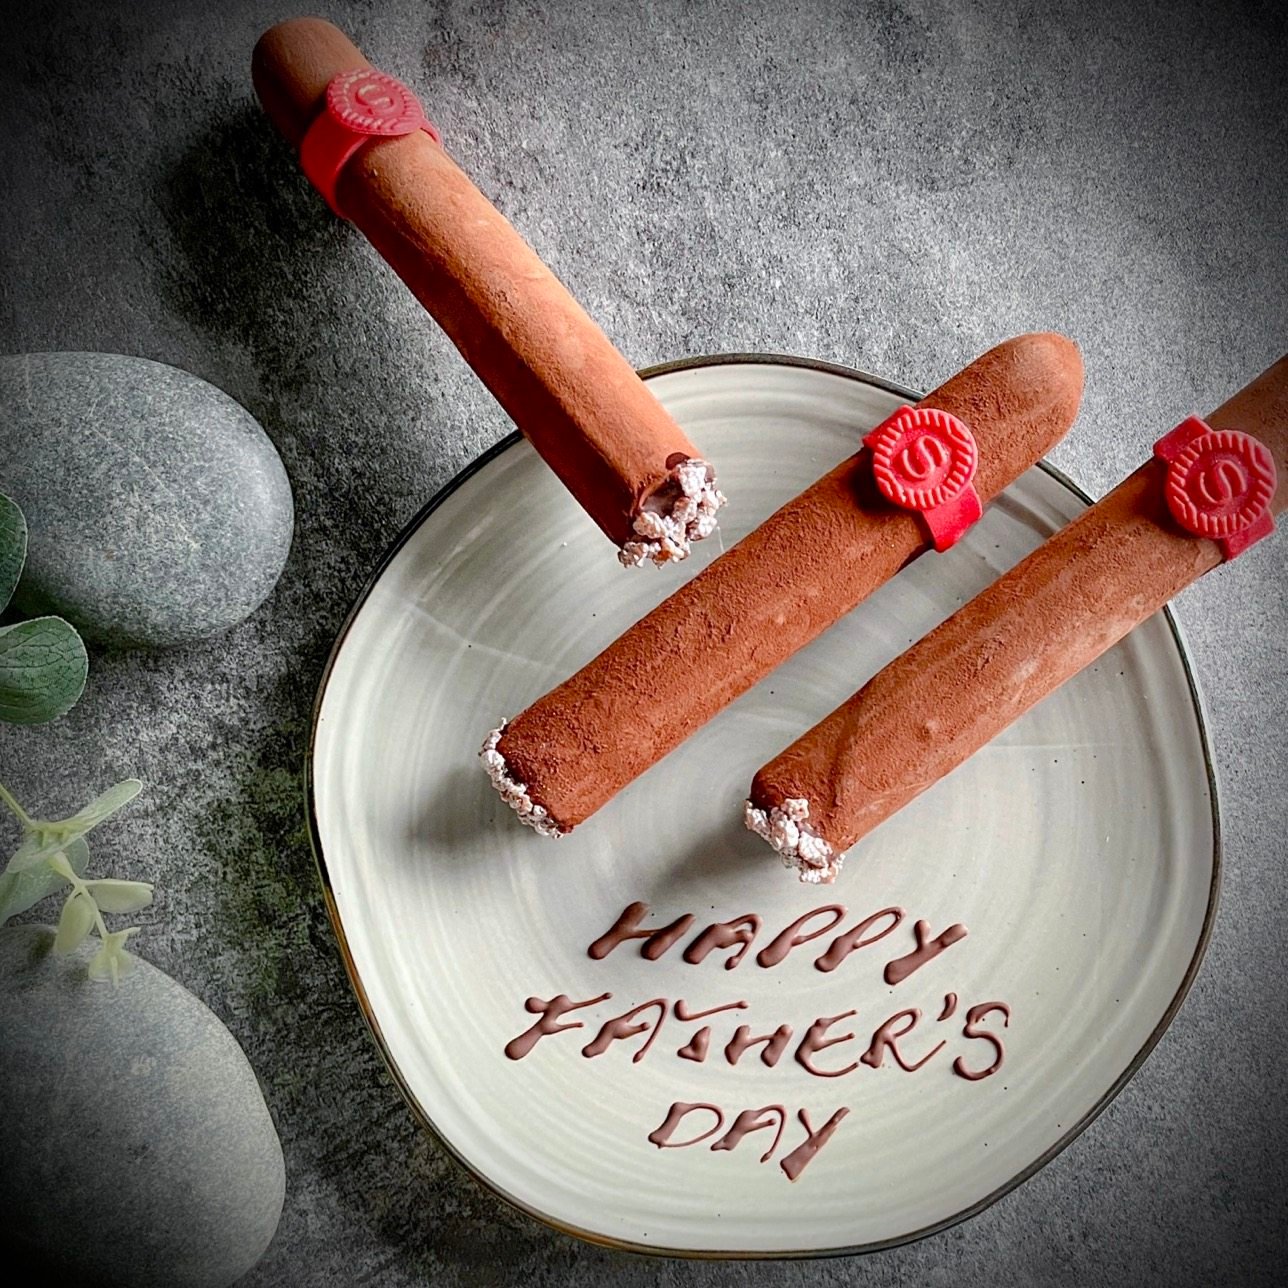 A hazelnut chocolate cigar serves as dessert at the Oyster & Wine Bar this Father’s Day. Photo: Oyster & Wine Bar